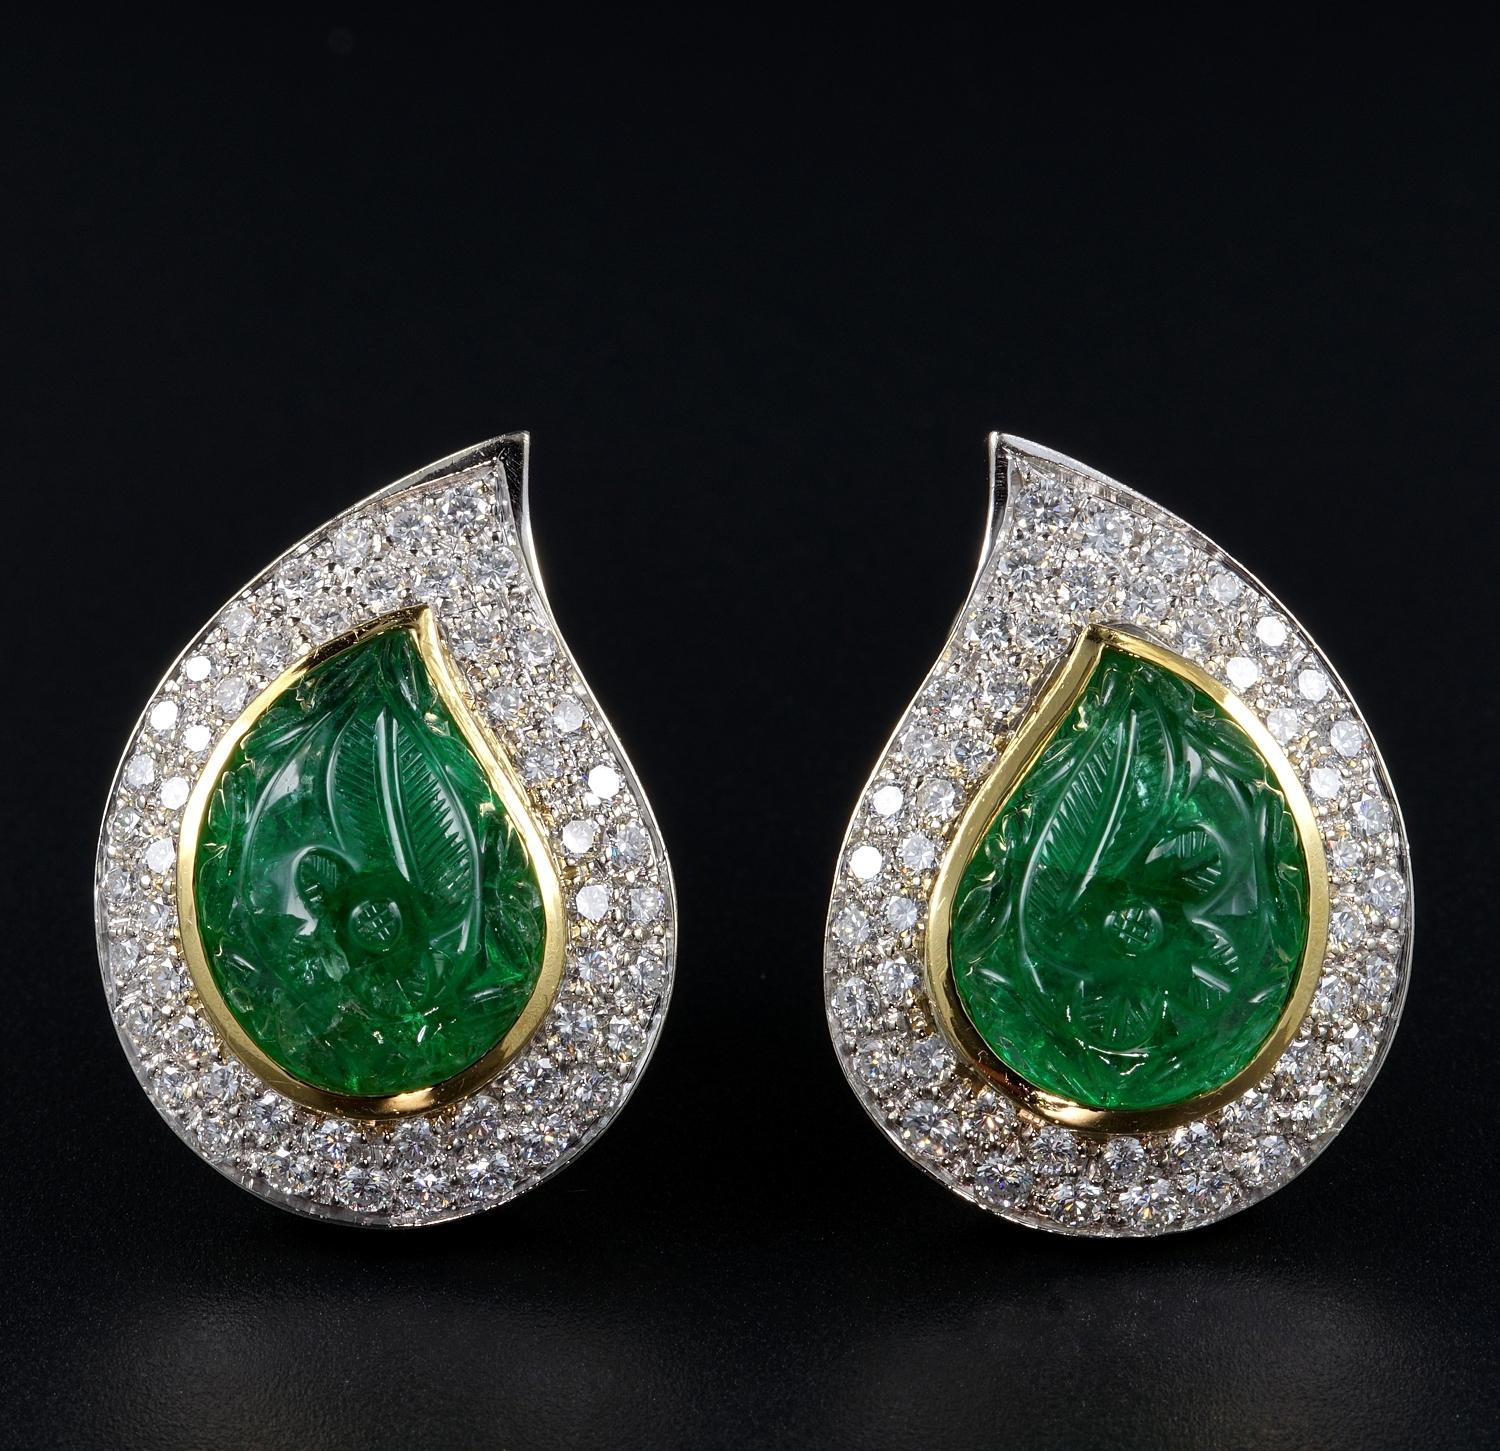 The Maharajah Empire
An impressive pair of vintage Mughal Carved Emerald and Diamond earrings
Imposing large scale, eye catching and sensational being of relevant size stunning in crafting
Hand crafted of solid 18 KT gold taking shape inspiration